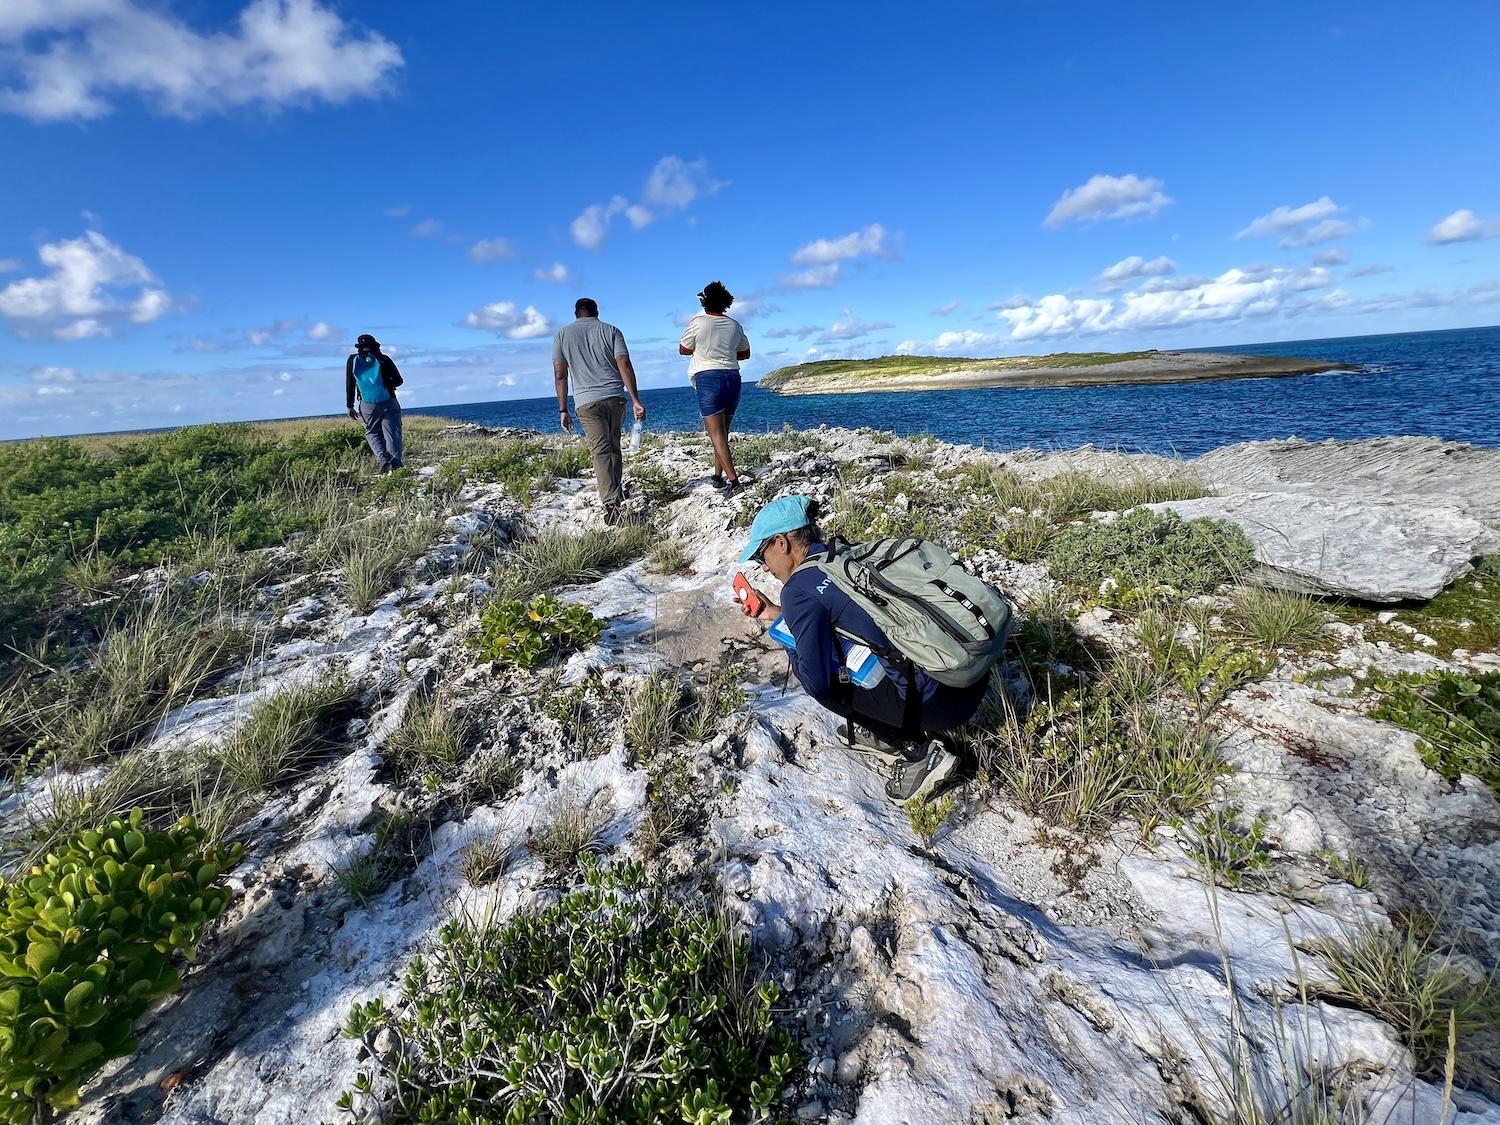 On an educational outing to Prickly Pear East in Anguilla, the Anguilla National Trust takes stock of conservation efforts.